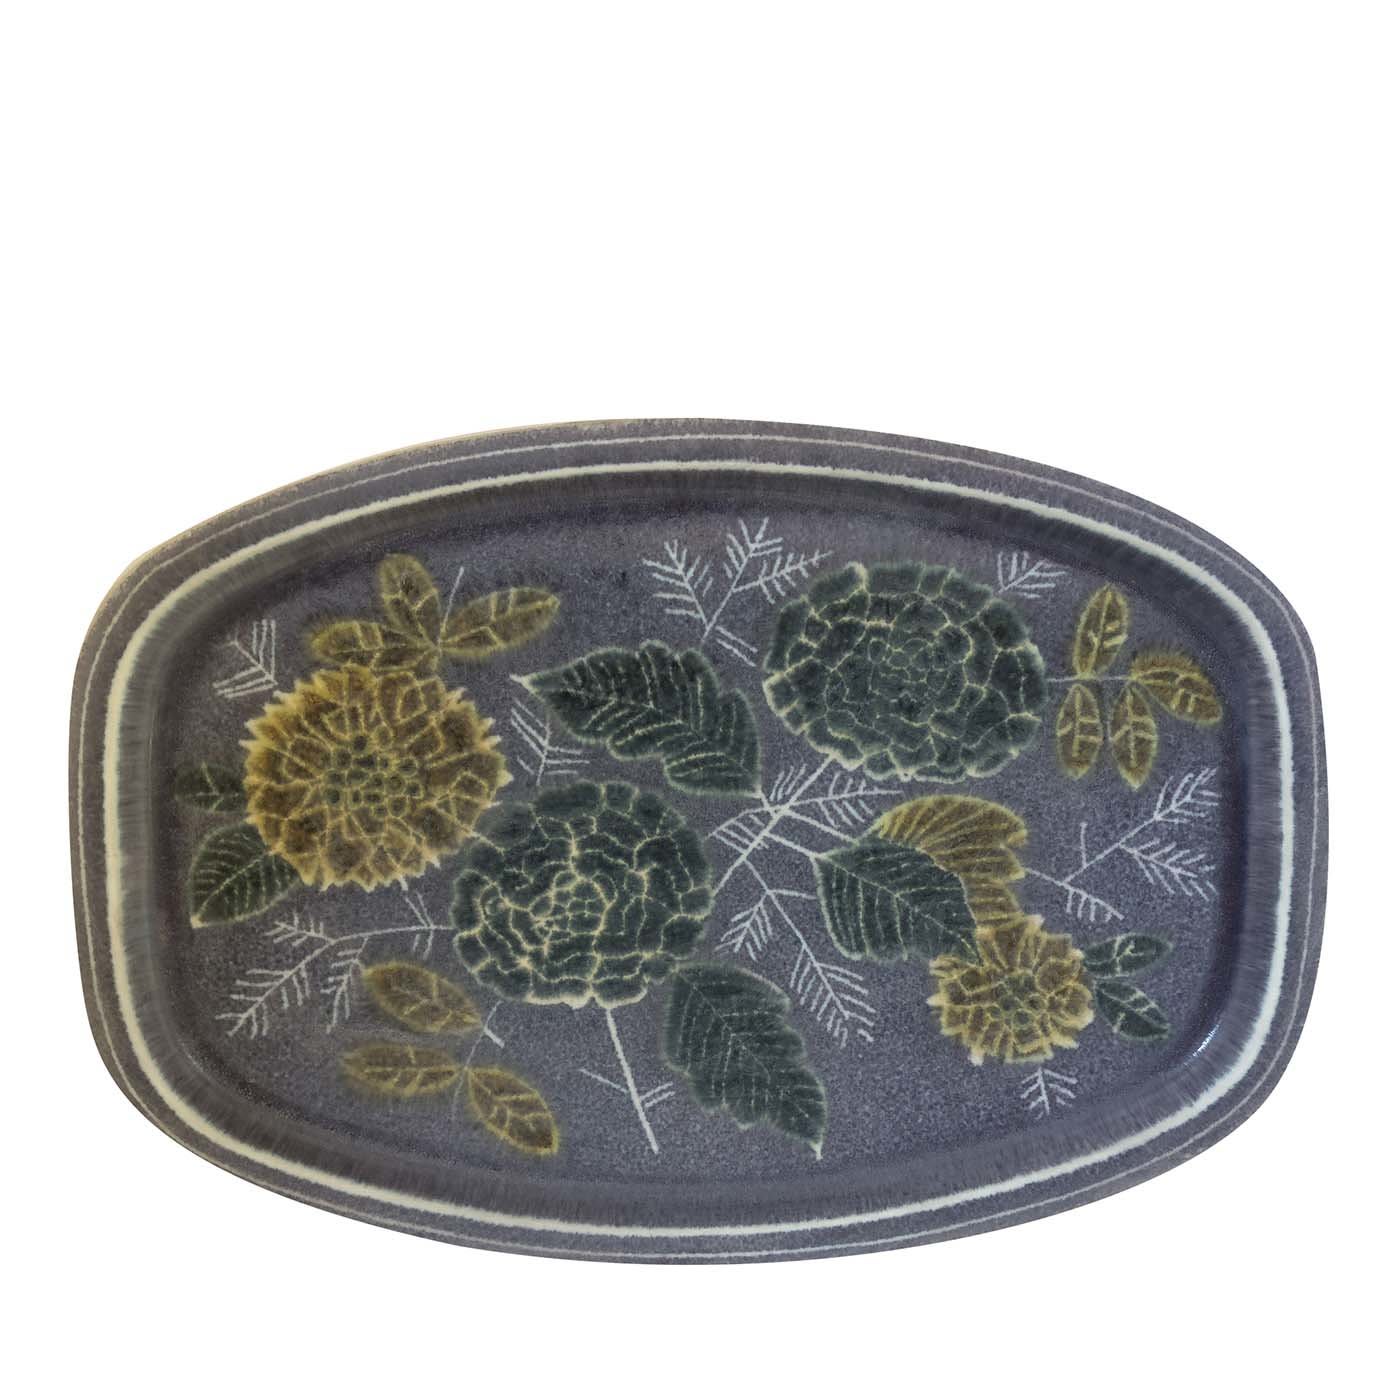 1980 Vintage Gray Tray - Nuove Forme